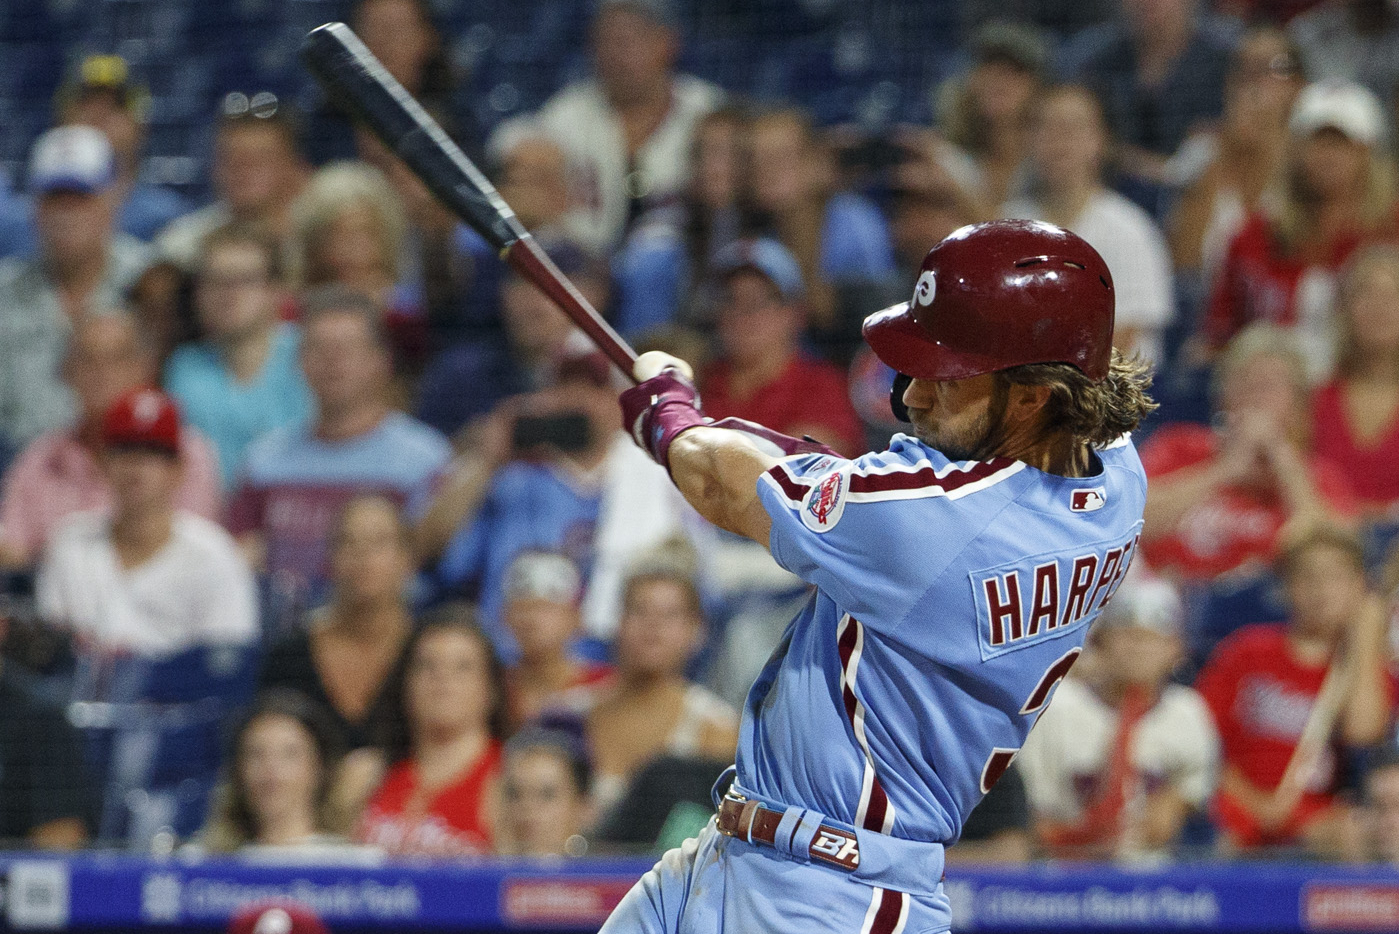 Video: Watch Phillies' Bryce Harper Crush Walk-off Grand Slam to Stun Cubs, News, Scores, Highlights, Stats, and Rumors